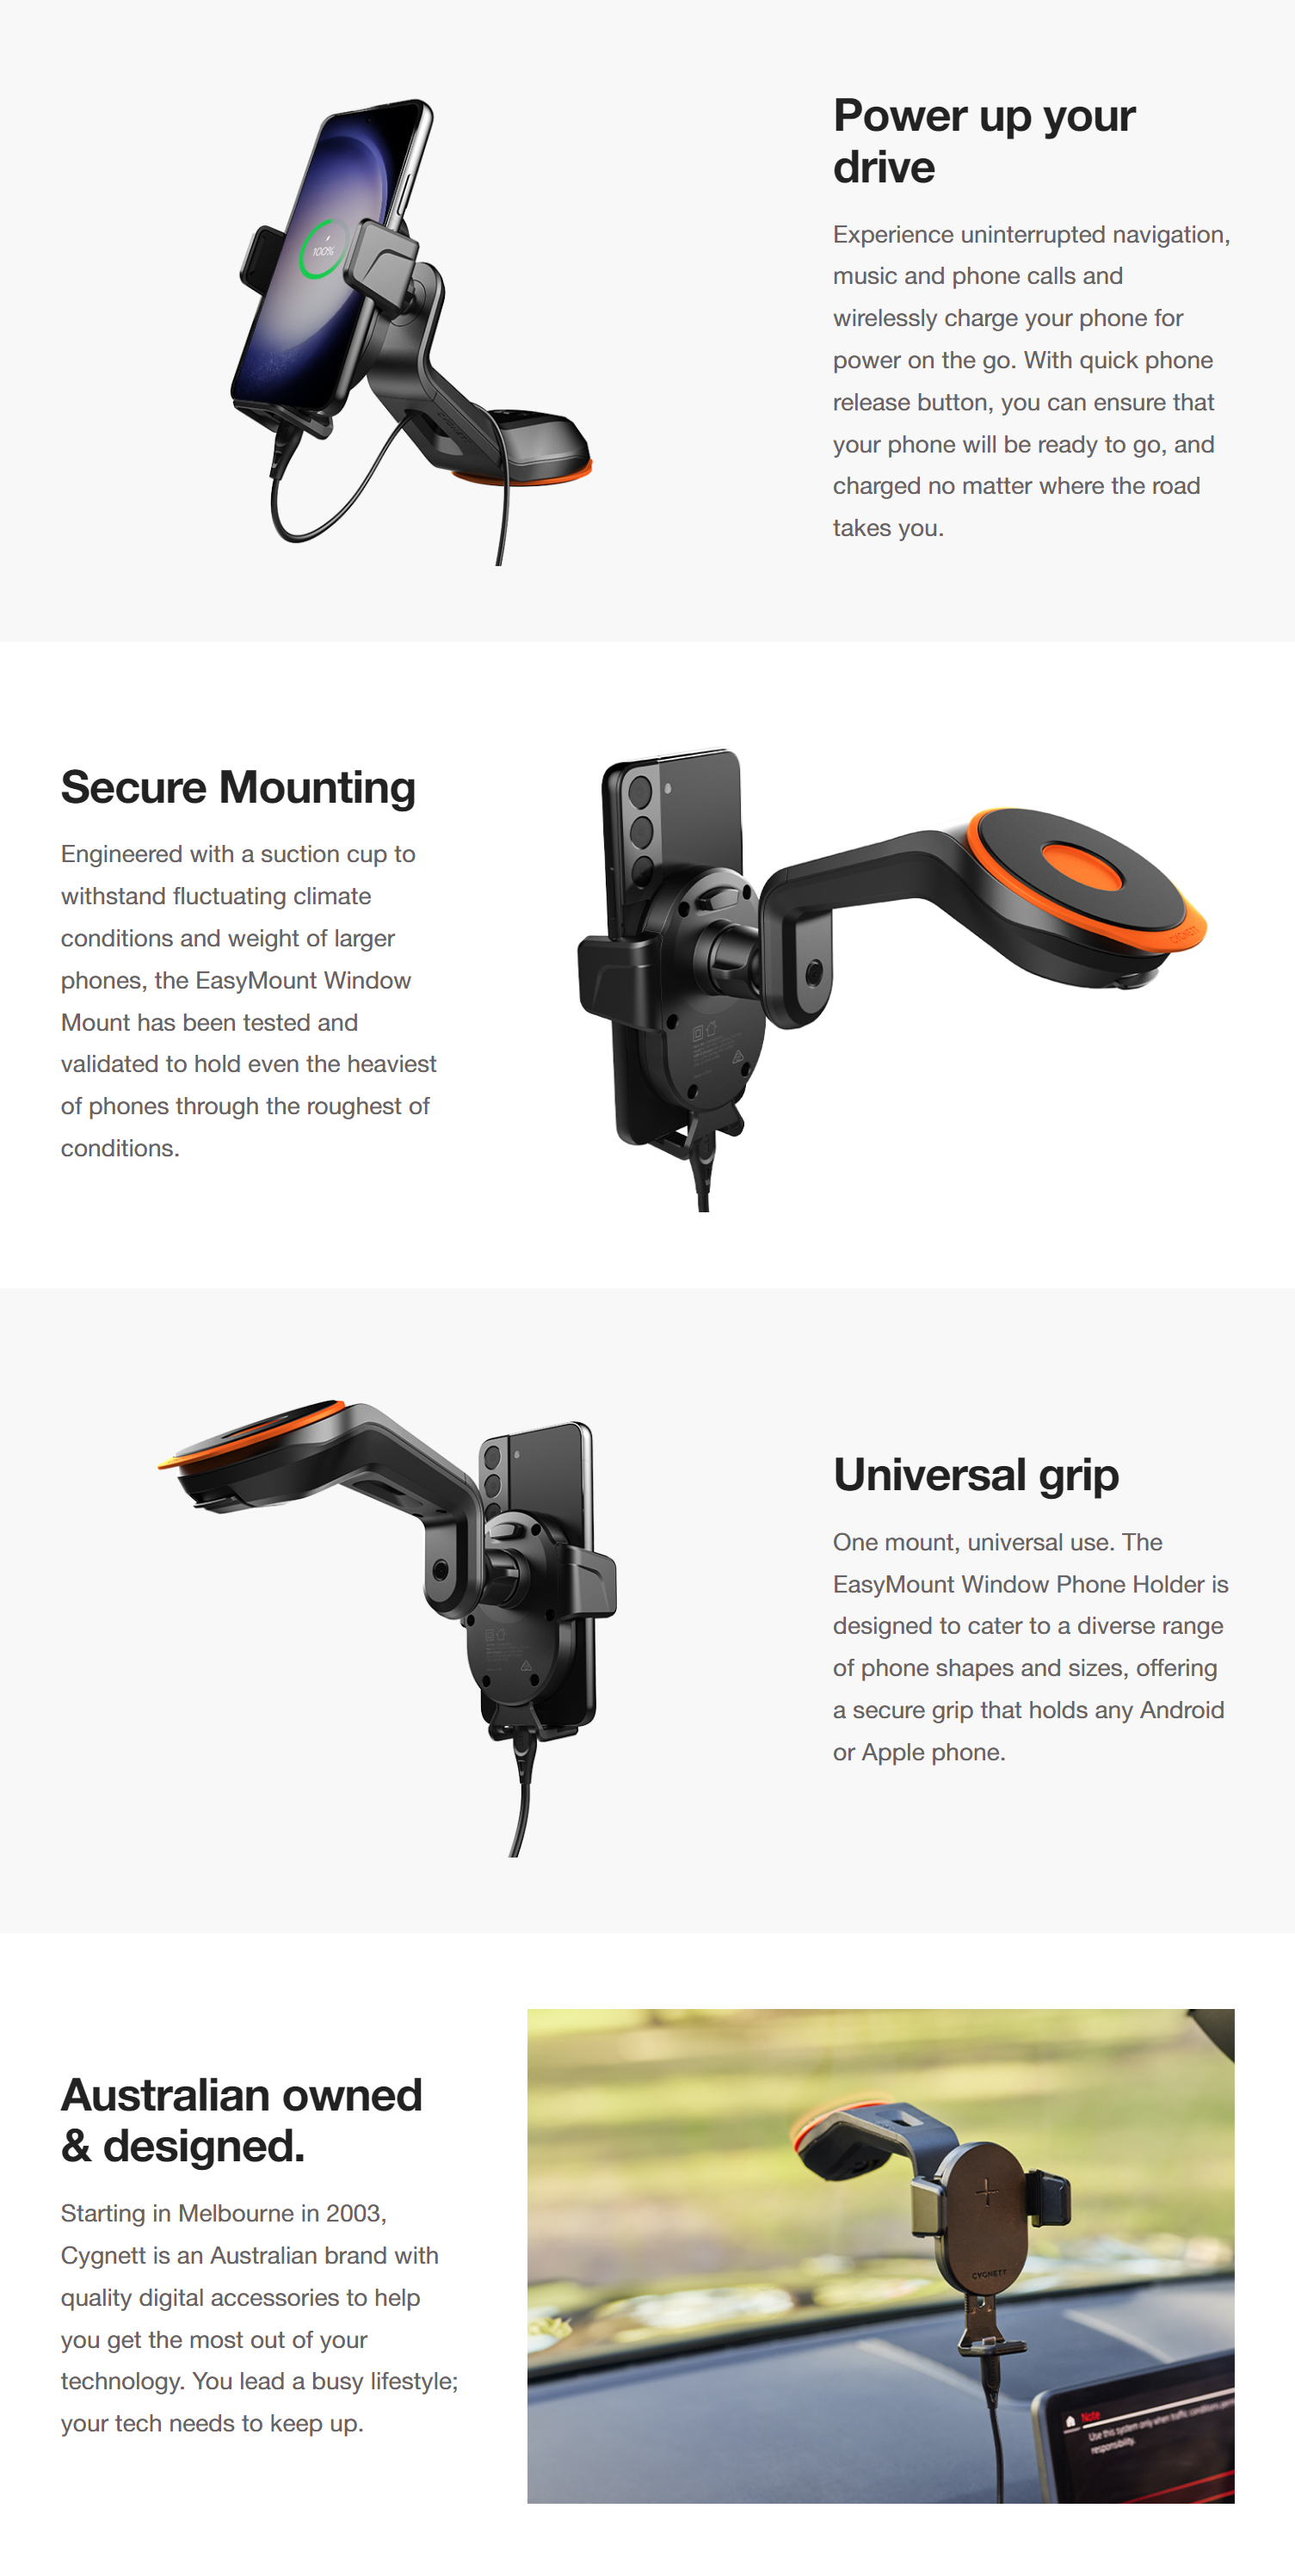 Mobile-Phone-Accessories-Cygnett-EasyMount-Car-Window-Mount-Fixed-Arm-with-10W-Fast-Wireless-Charger-1